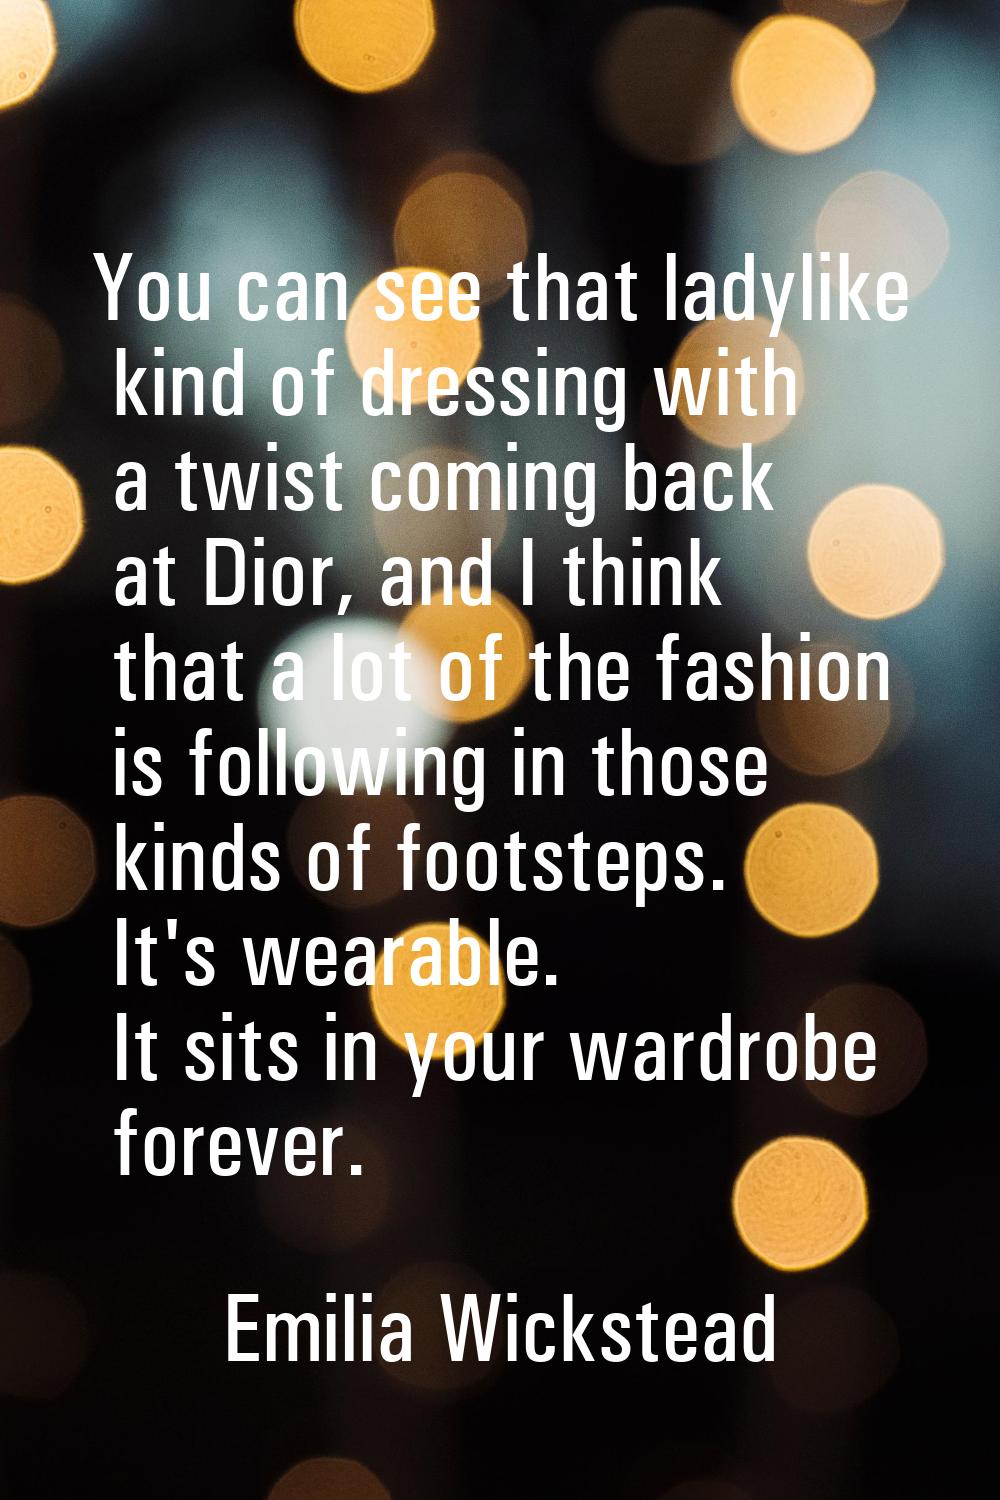 You can see that ladylike kind of dressing with a twist coming back at Dior, and I think that a lot